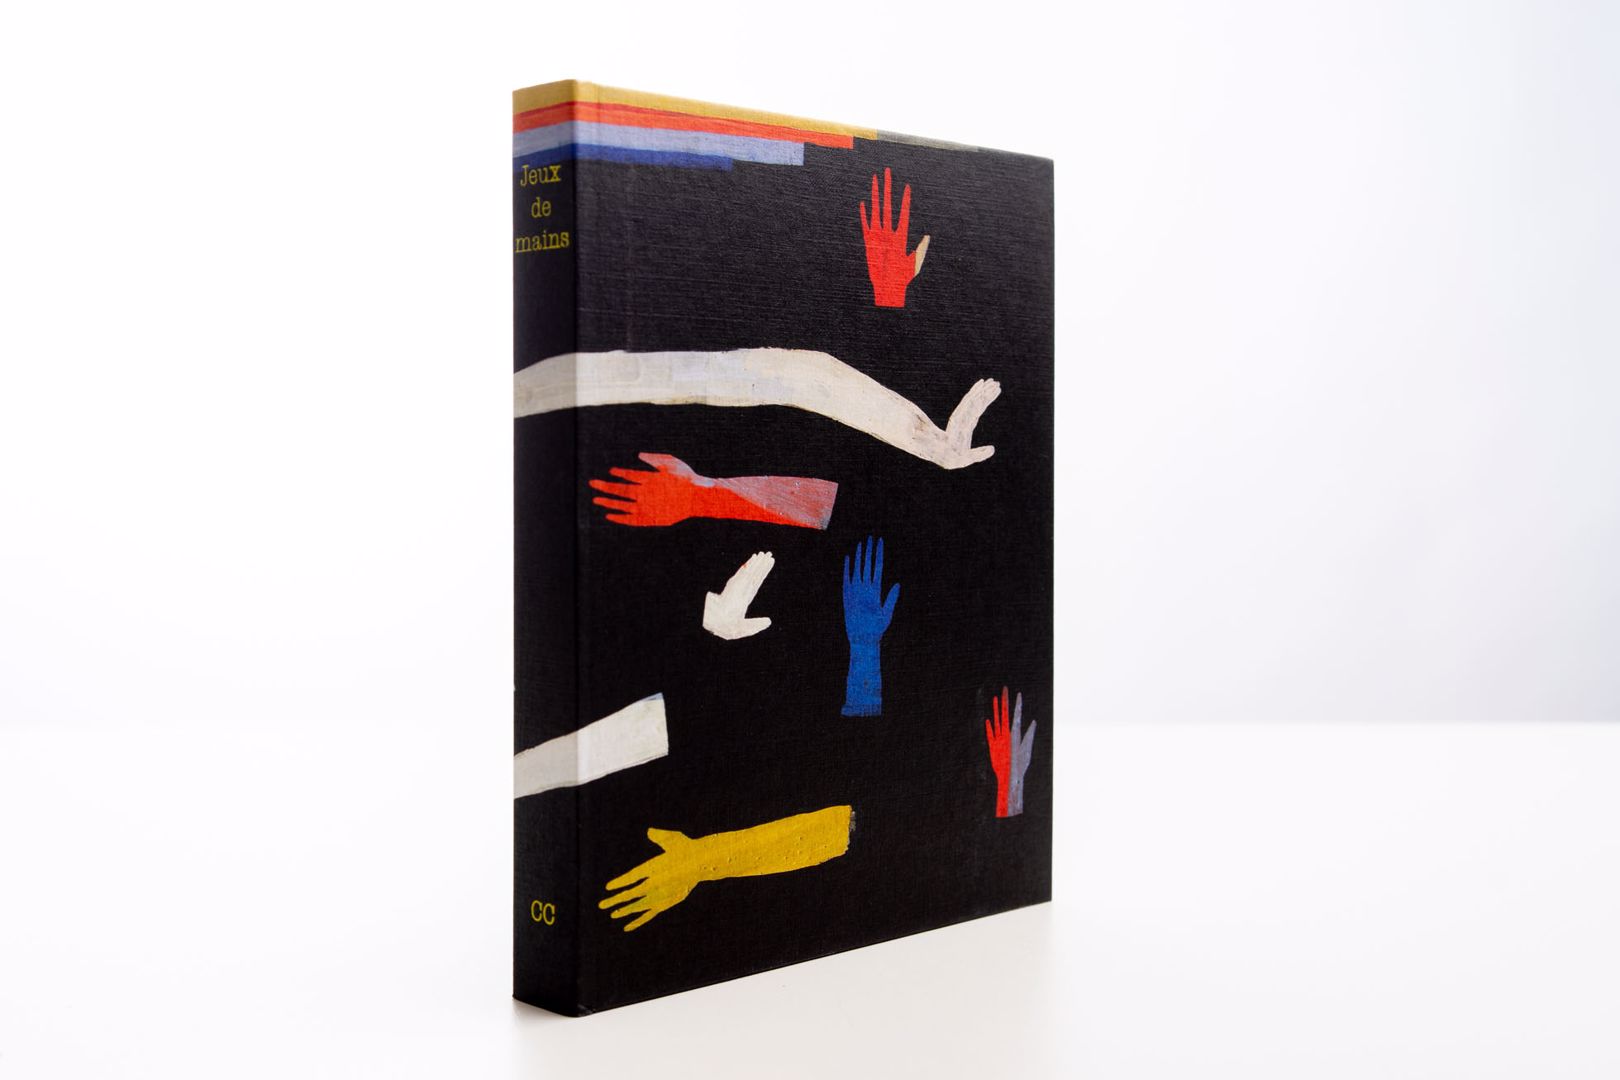 Jeux de mains selected as one of the best books of 2021